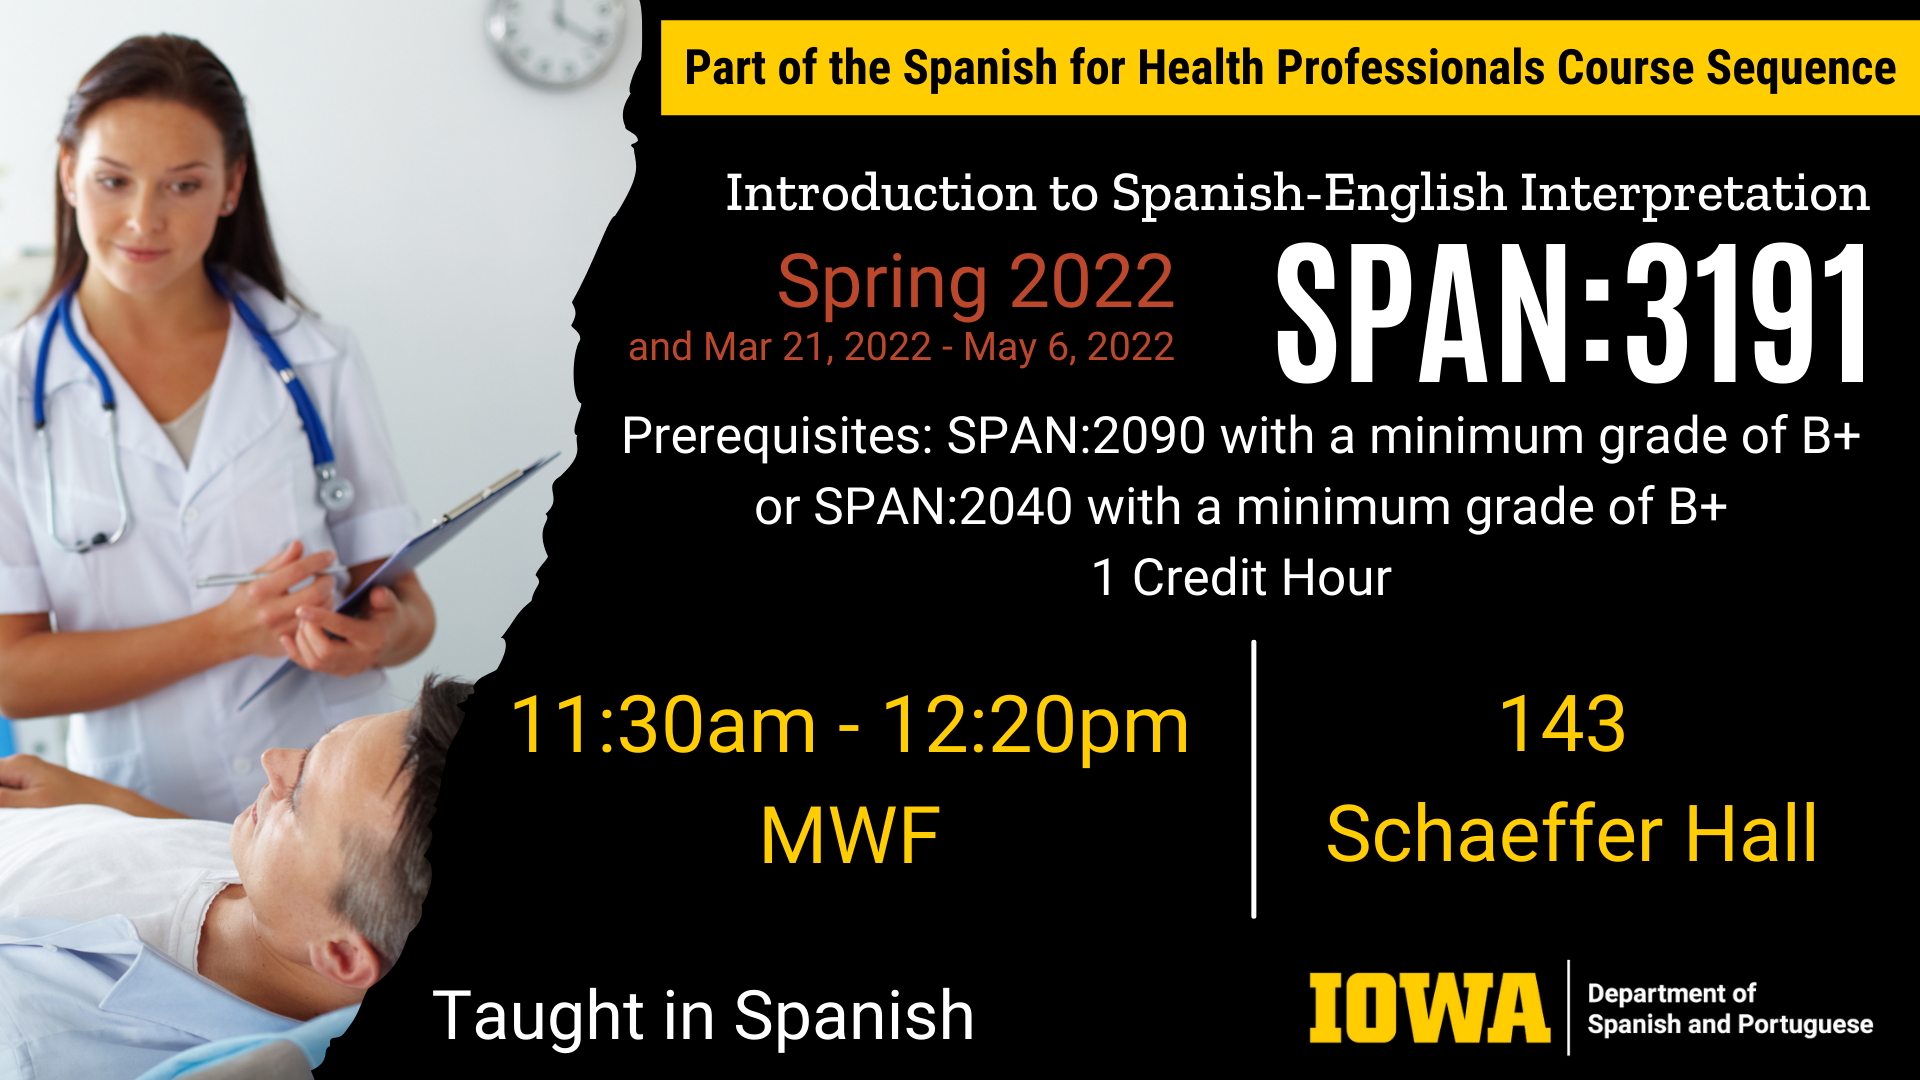 Introduction to Spanish-English Interpretation SPAN 3191 happening in Spring 2022 and special term March 21 through May 6 2022. Prerequisites: SPAN 2090 with a minimum grade of B plus or SPAN 2040 with a minimum grade of B plus 1 Credit Hour. Class is from 11:30am to 12:30pm Mondays, Wednesdays, Fridays in 143 Schaeffer Hall. This course is taught in Spanish.